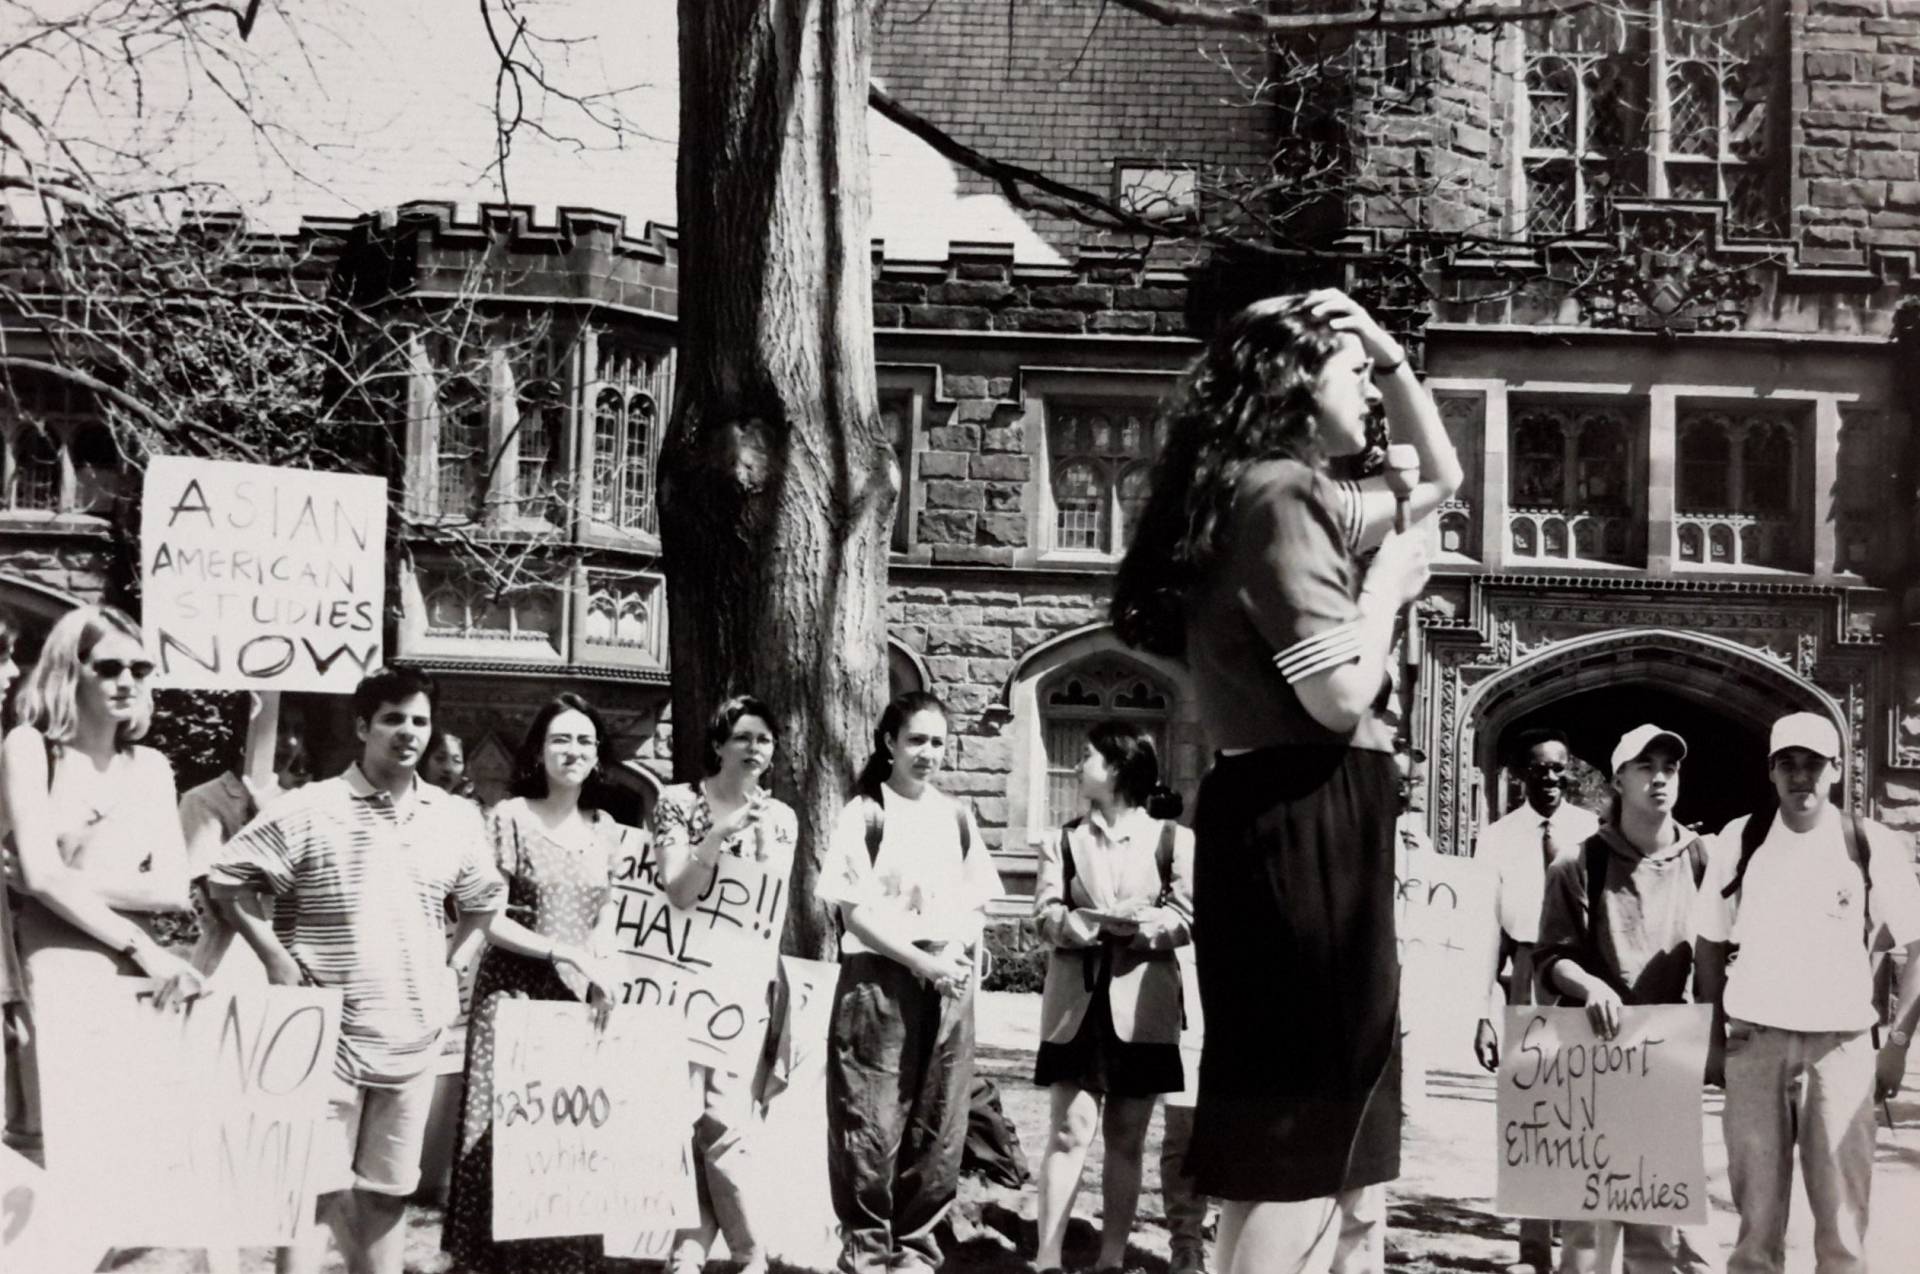 A protest demanding an expansion of the curriculum to include ethnic and women's studies